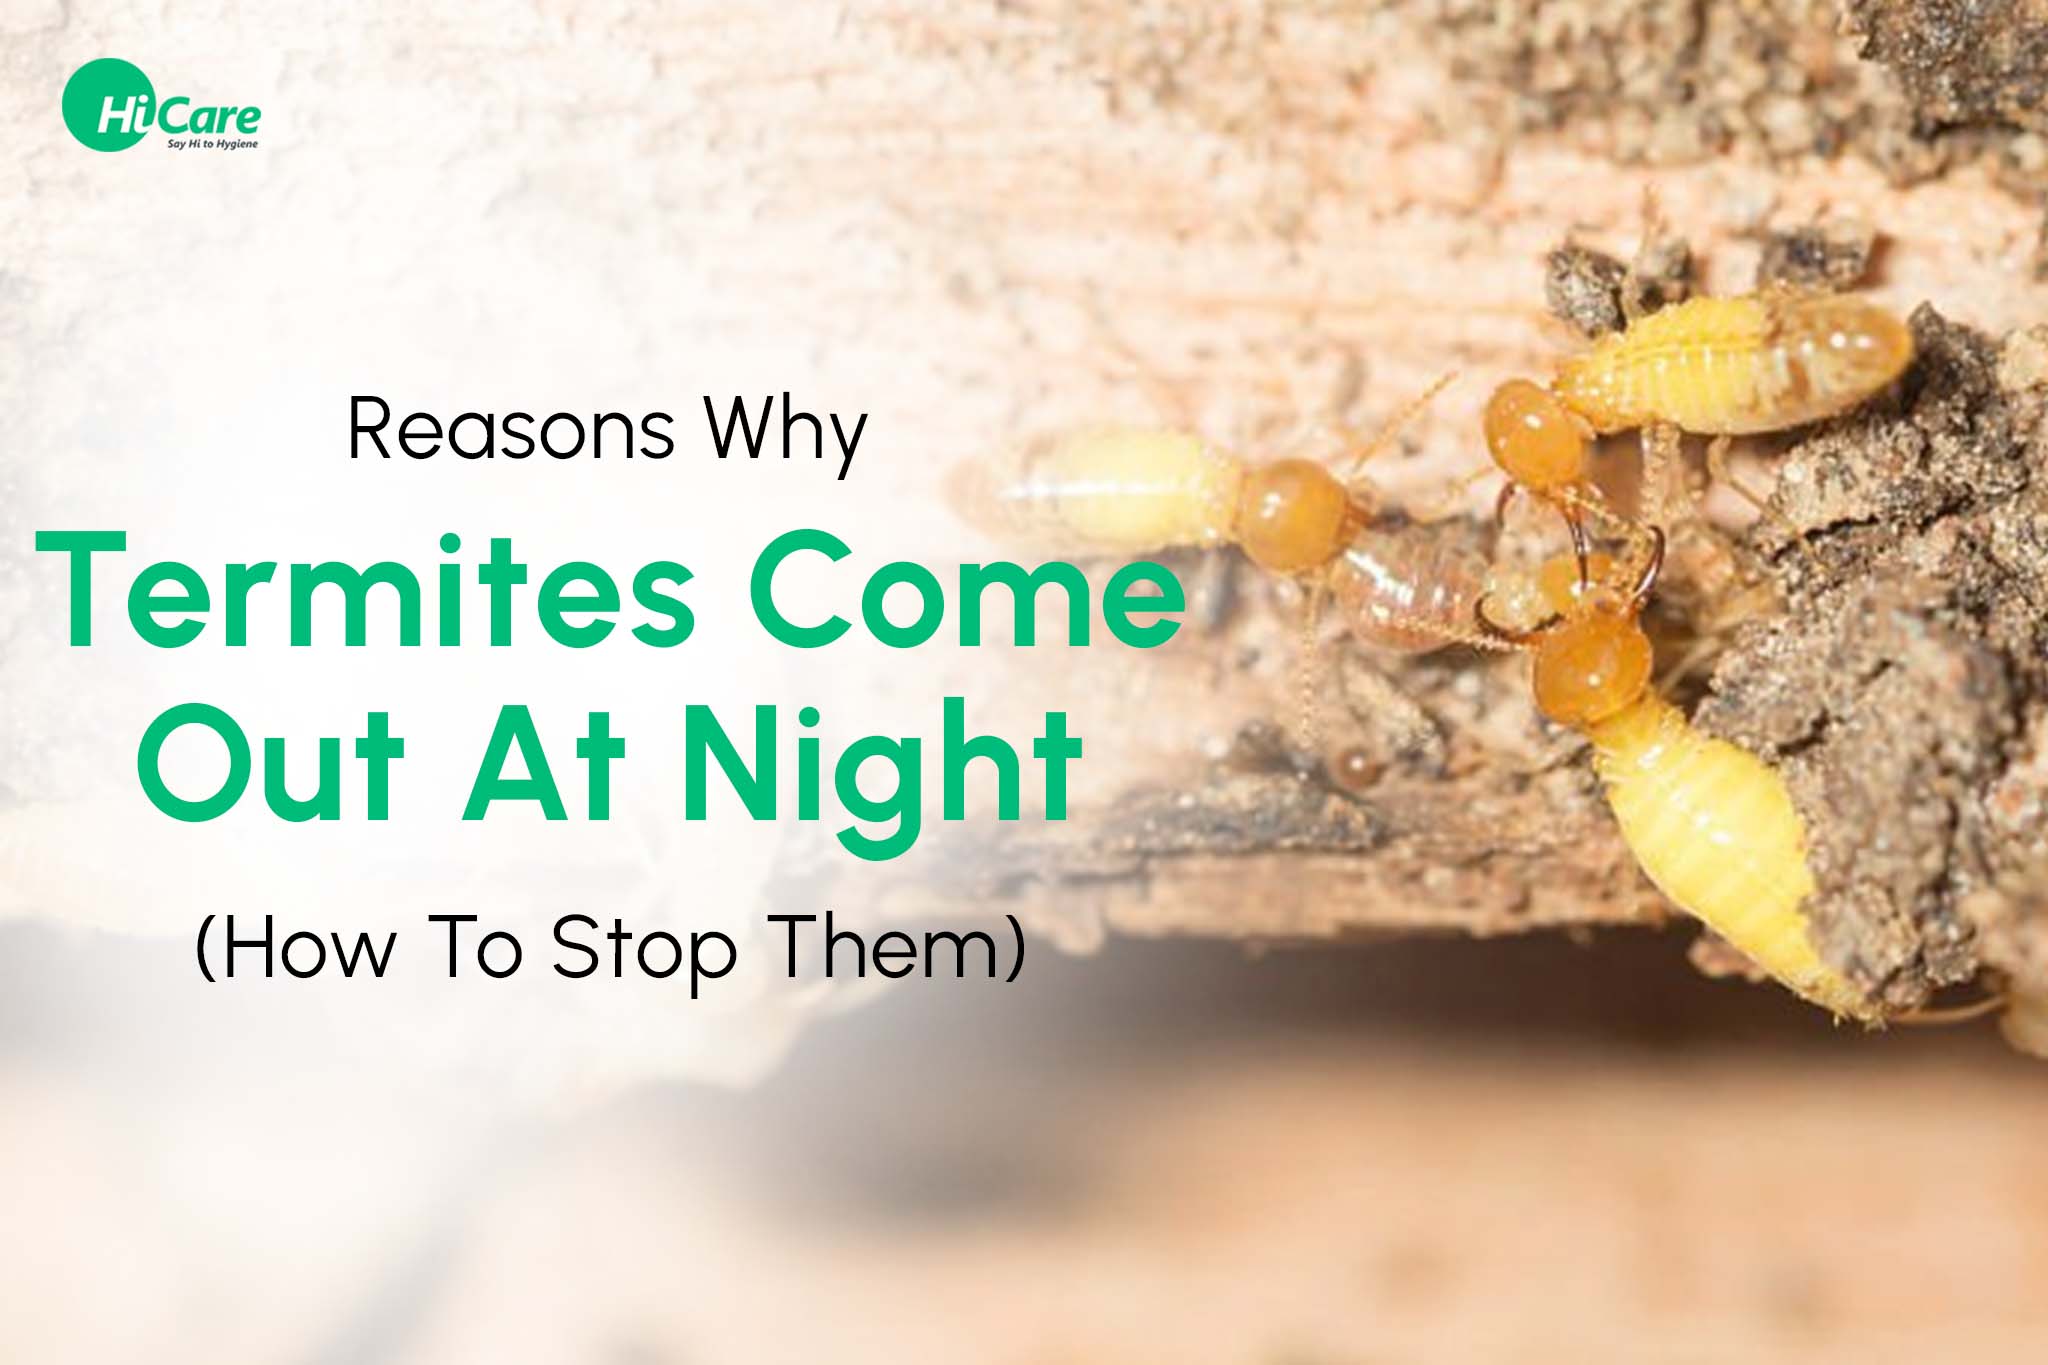 5 Reasons Why Termites Come Out At Night (How To Stop Them)